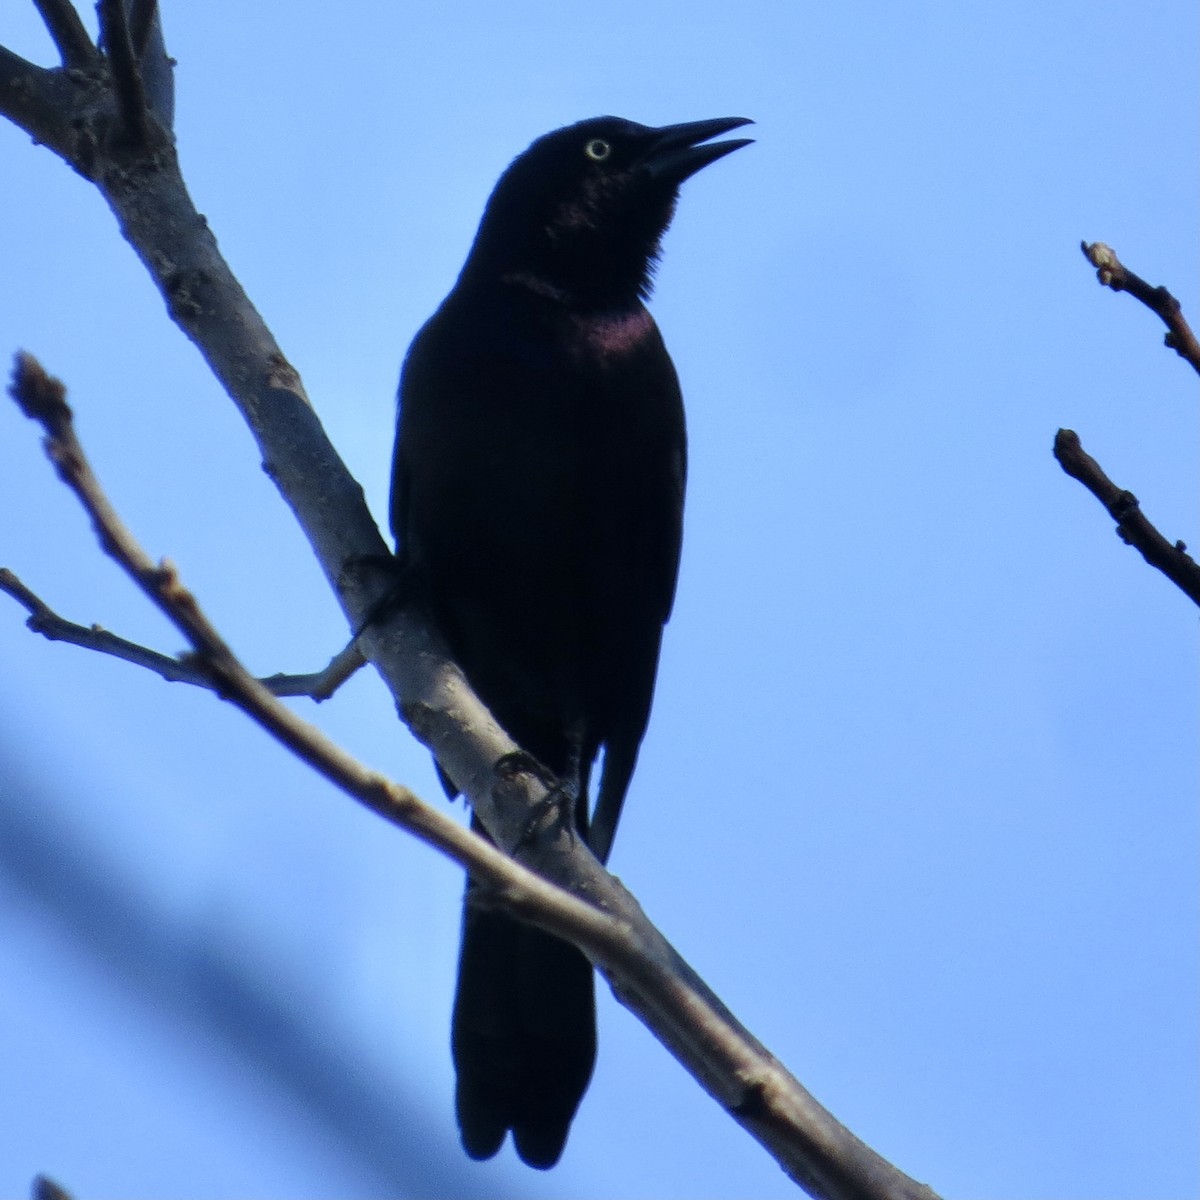 Common Grackle - Bill Lisowsky